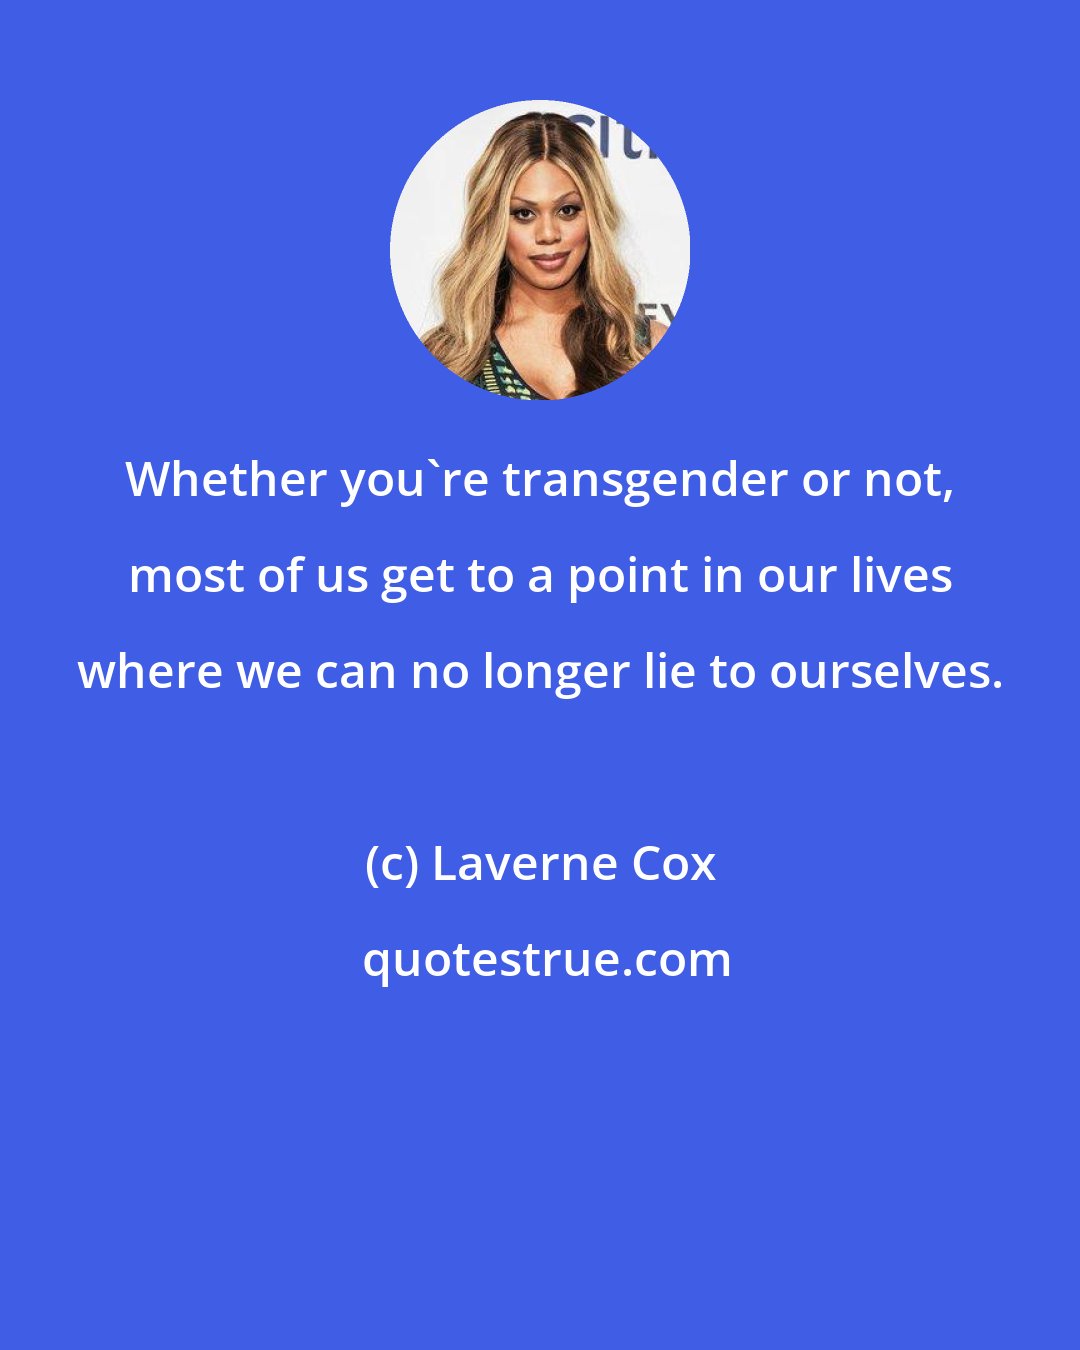 Laverne Cox: Whether you're transgender or not, most of us get to a point in our lives where we can no longer lie to ourselves.